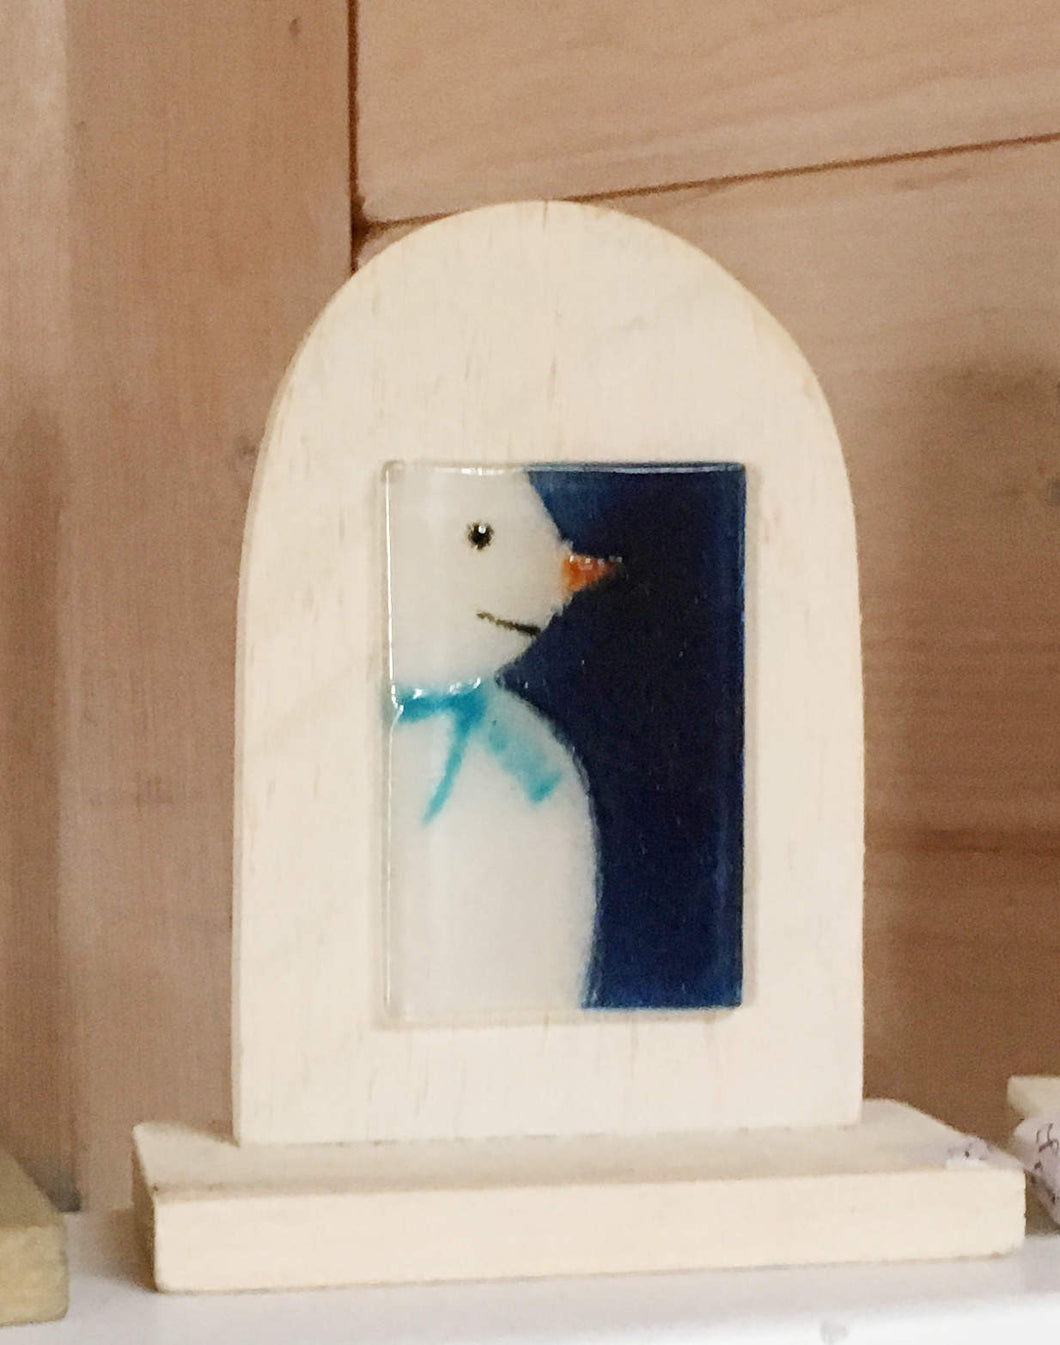 Table Top Ornament: Glass picture tile featuring snowman in blue scarf, mounted on a wooden white arch